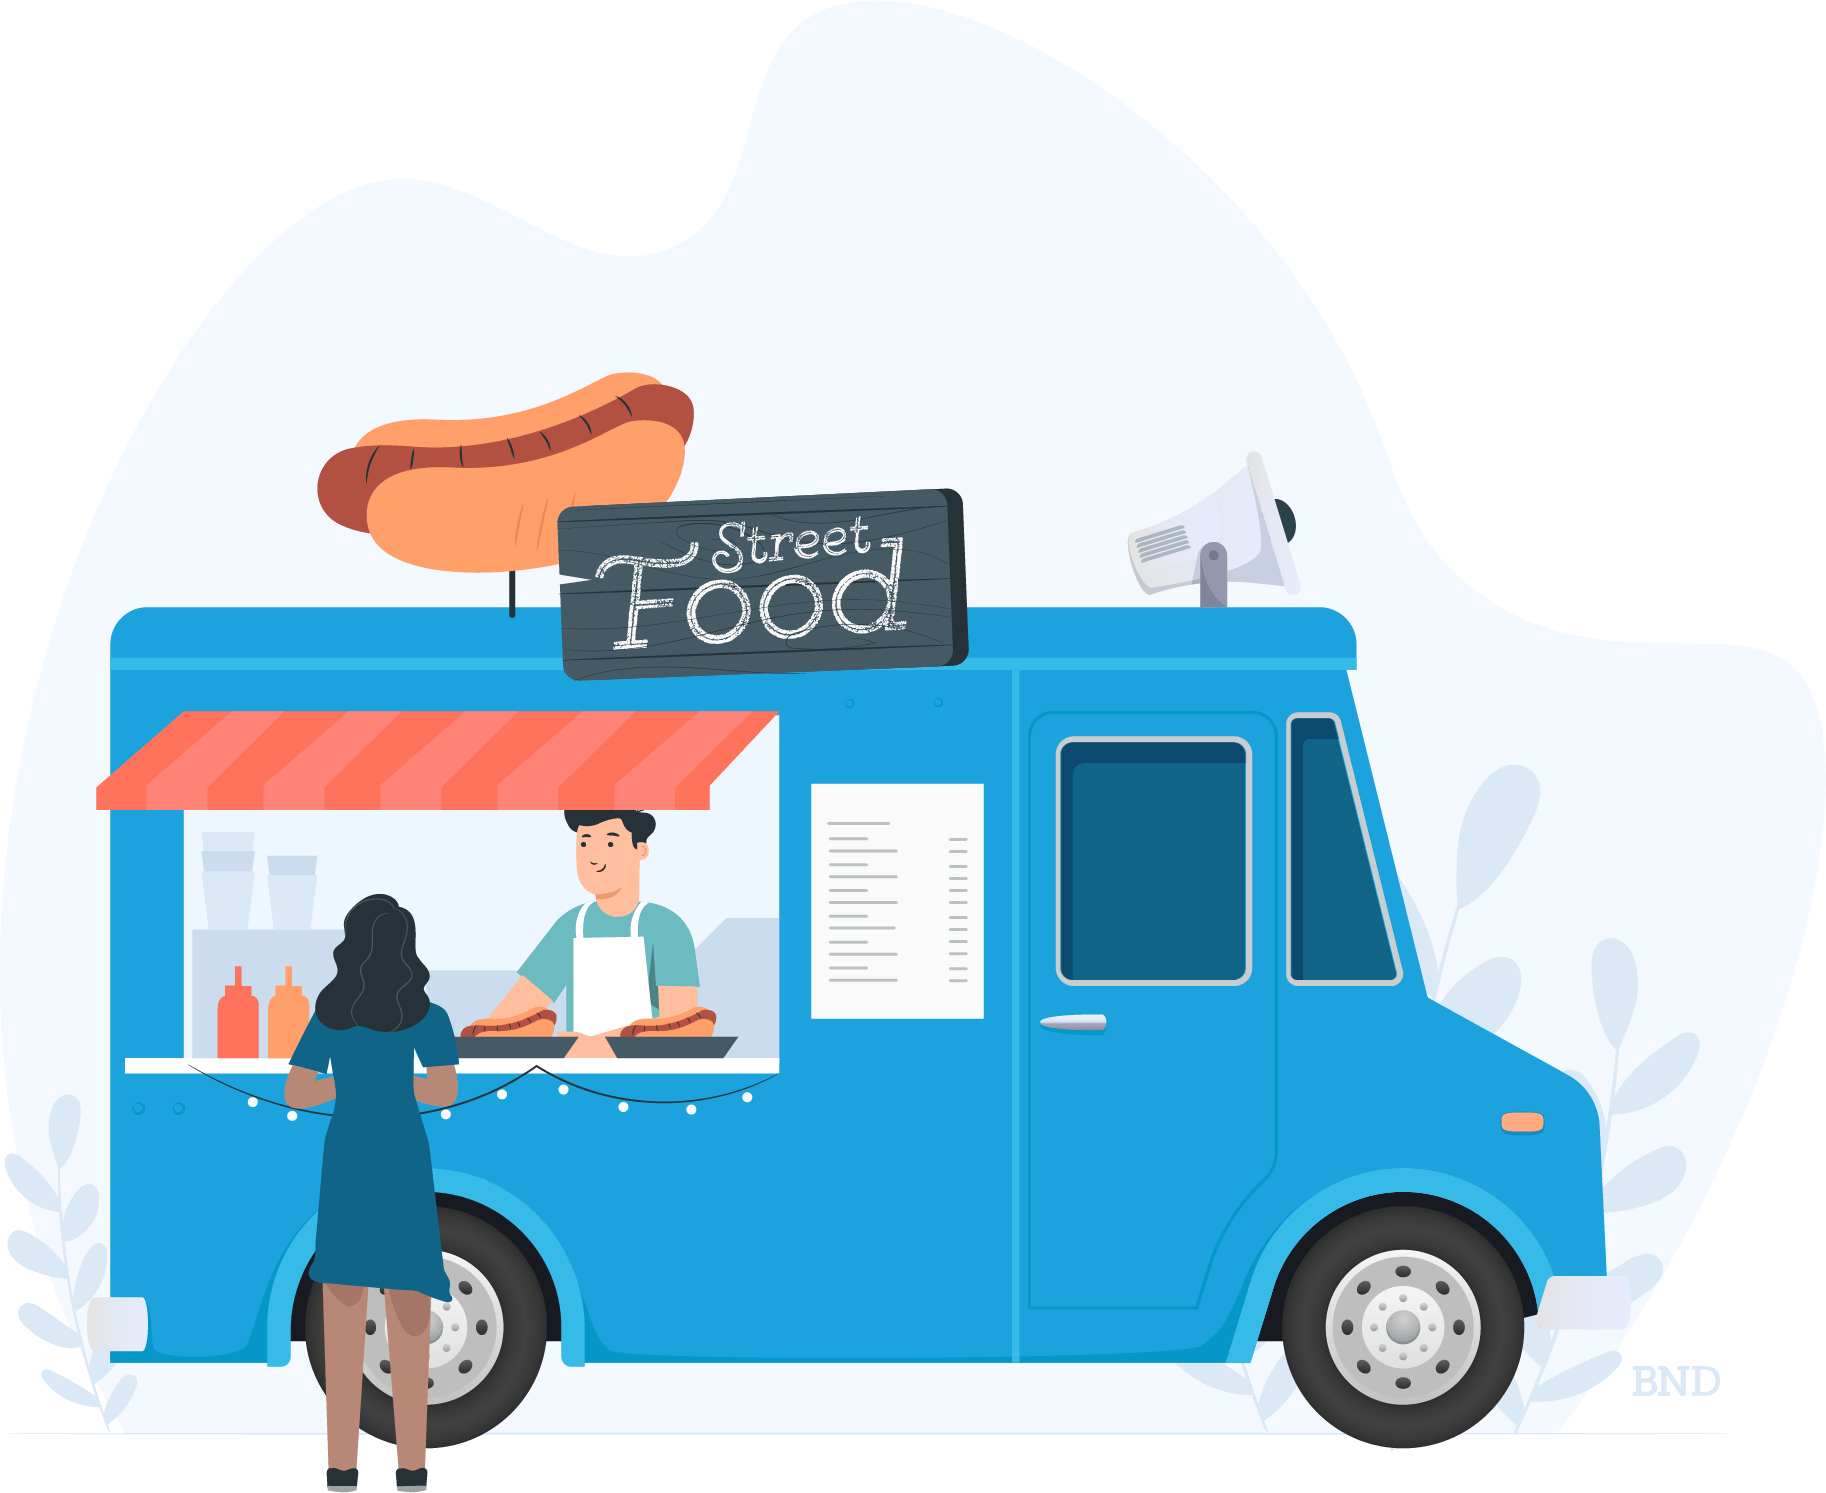 Food truck Small business idea | Image Source : businessnewdaily.com